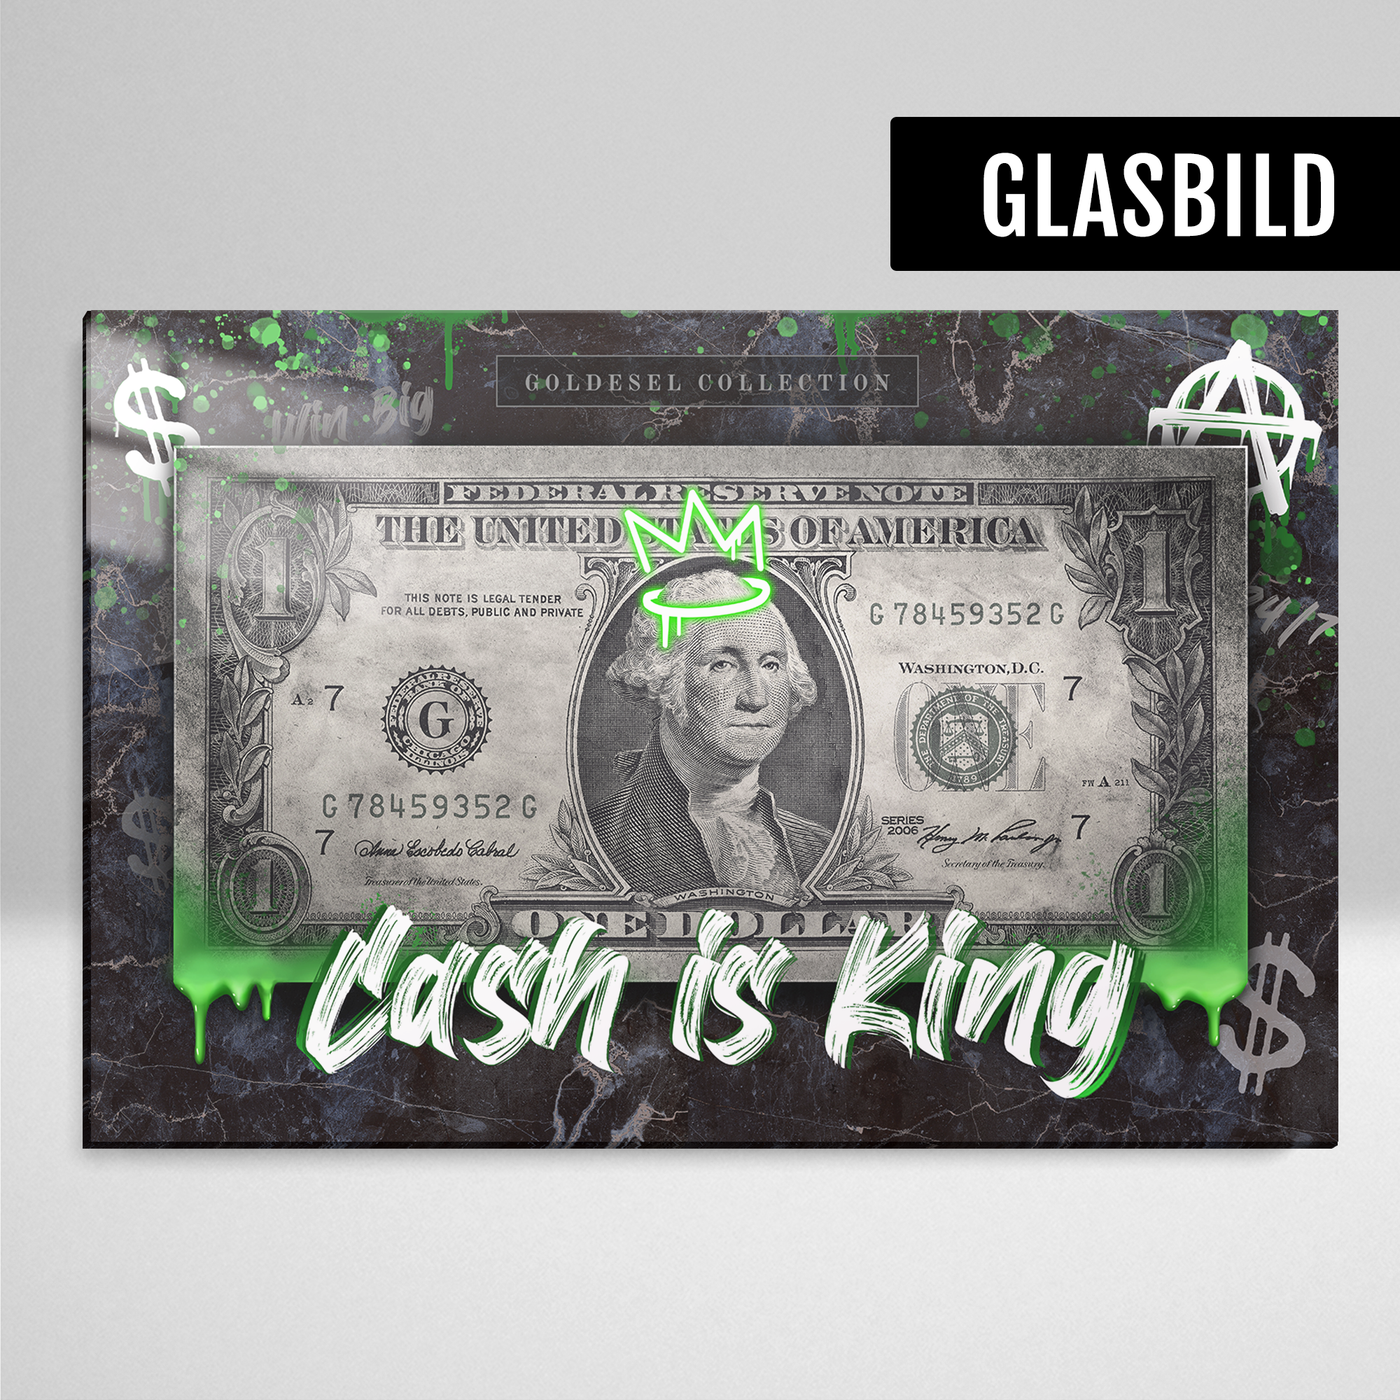 Cash is King - Goldesel Collection